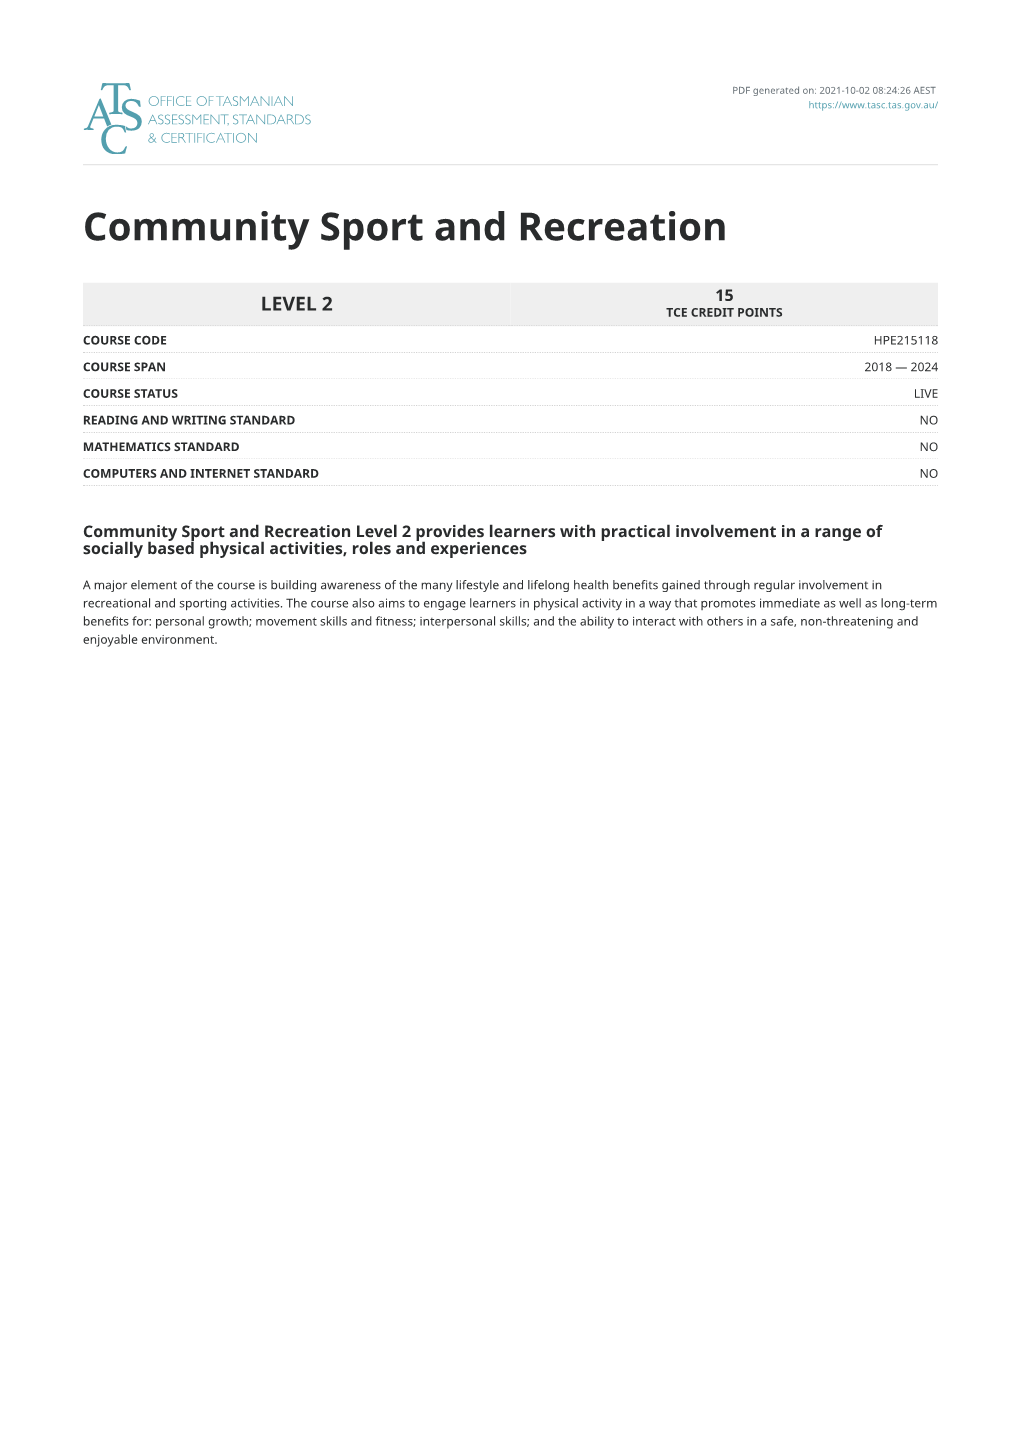 Community Sport and Recreation